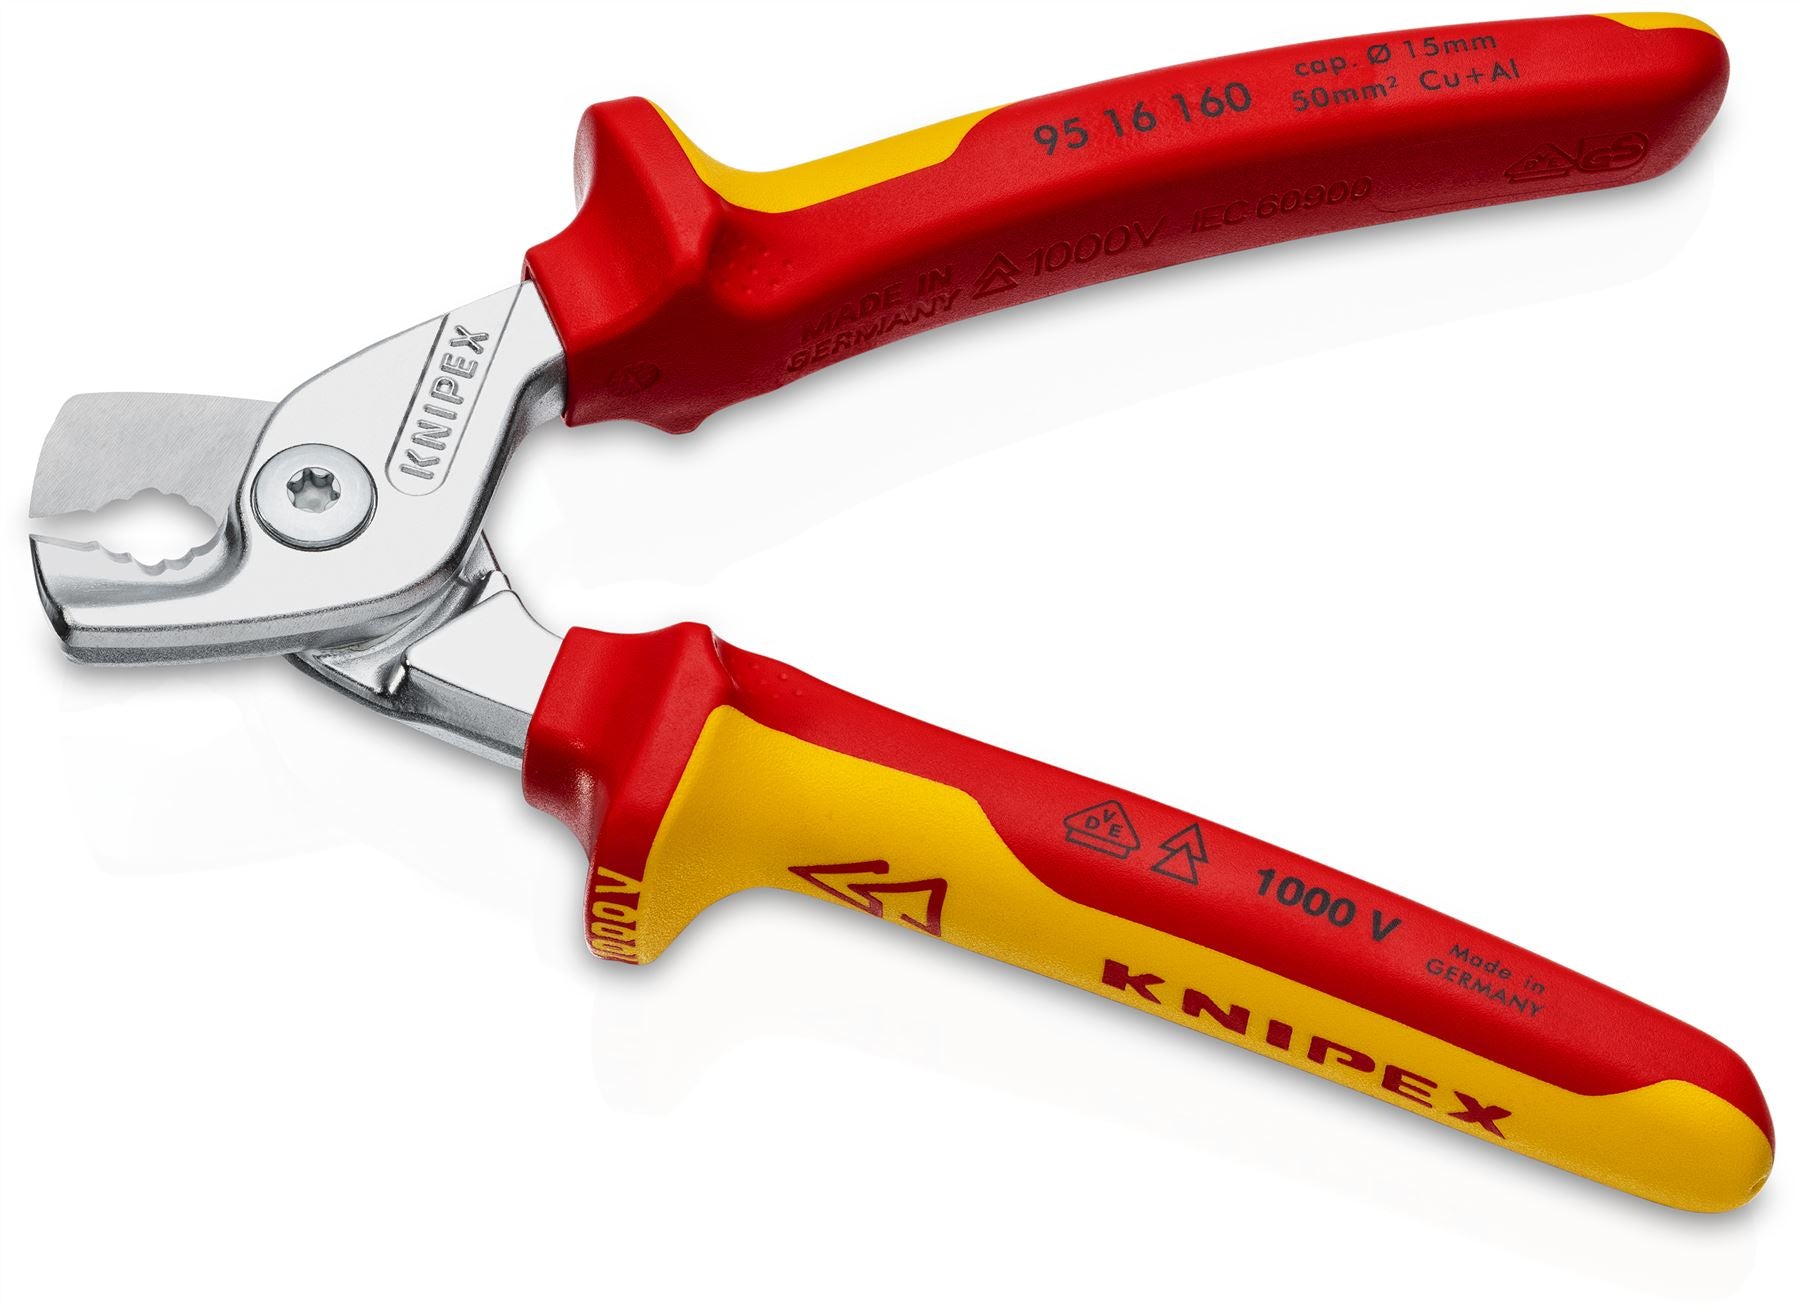 KNIPEX StepCut Cable Shears Cutting Pliers 15mm Capacity 160mm Chrome VDE Insulated Multi Component Grips 95 16 160 SB